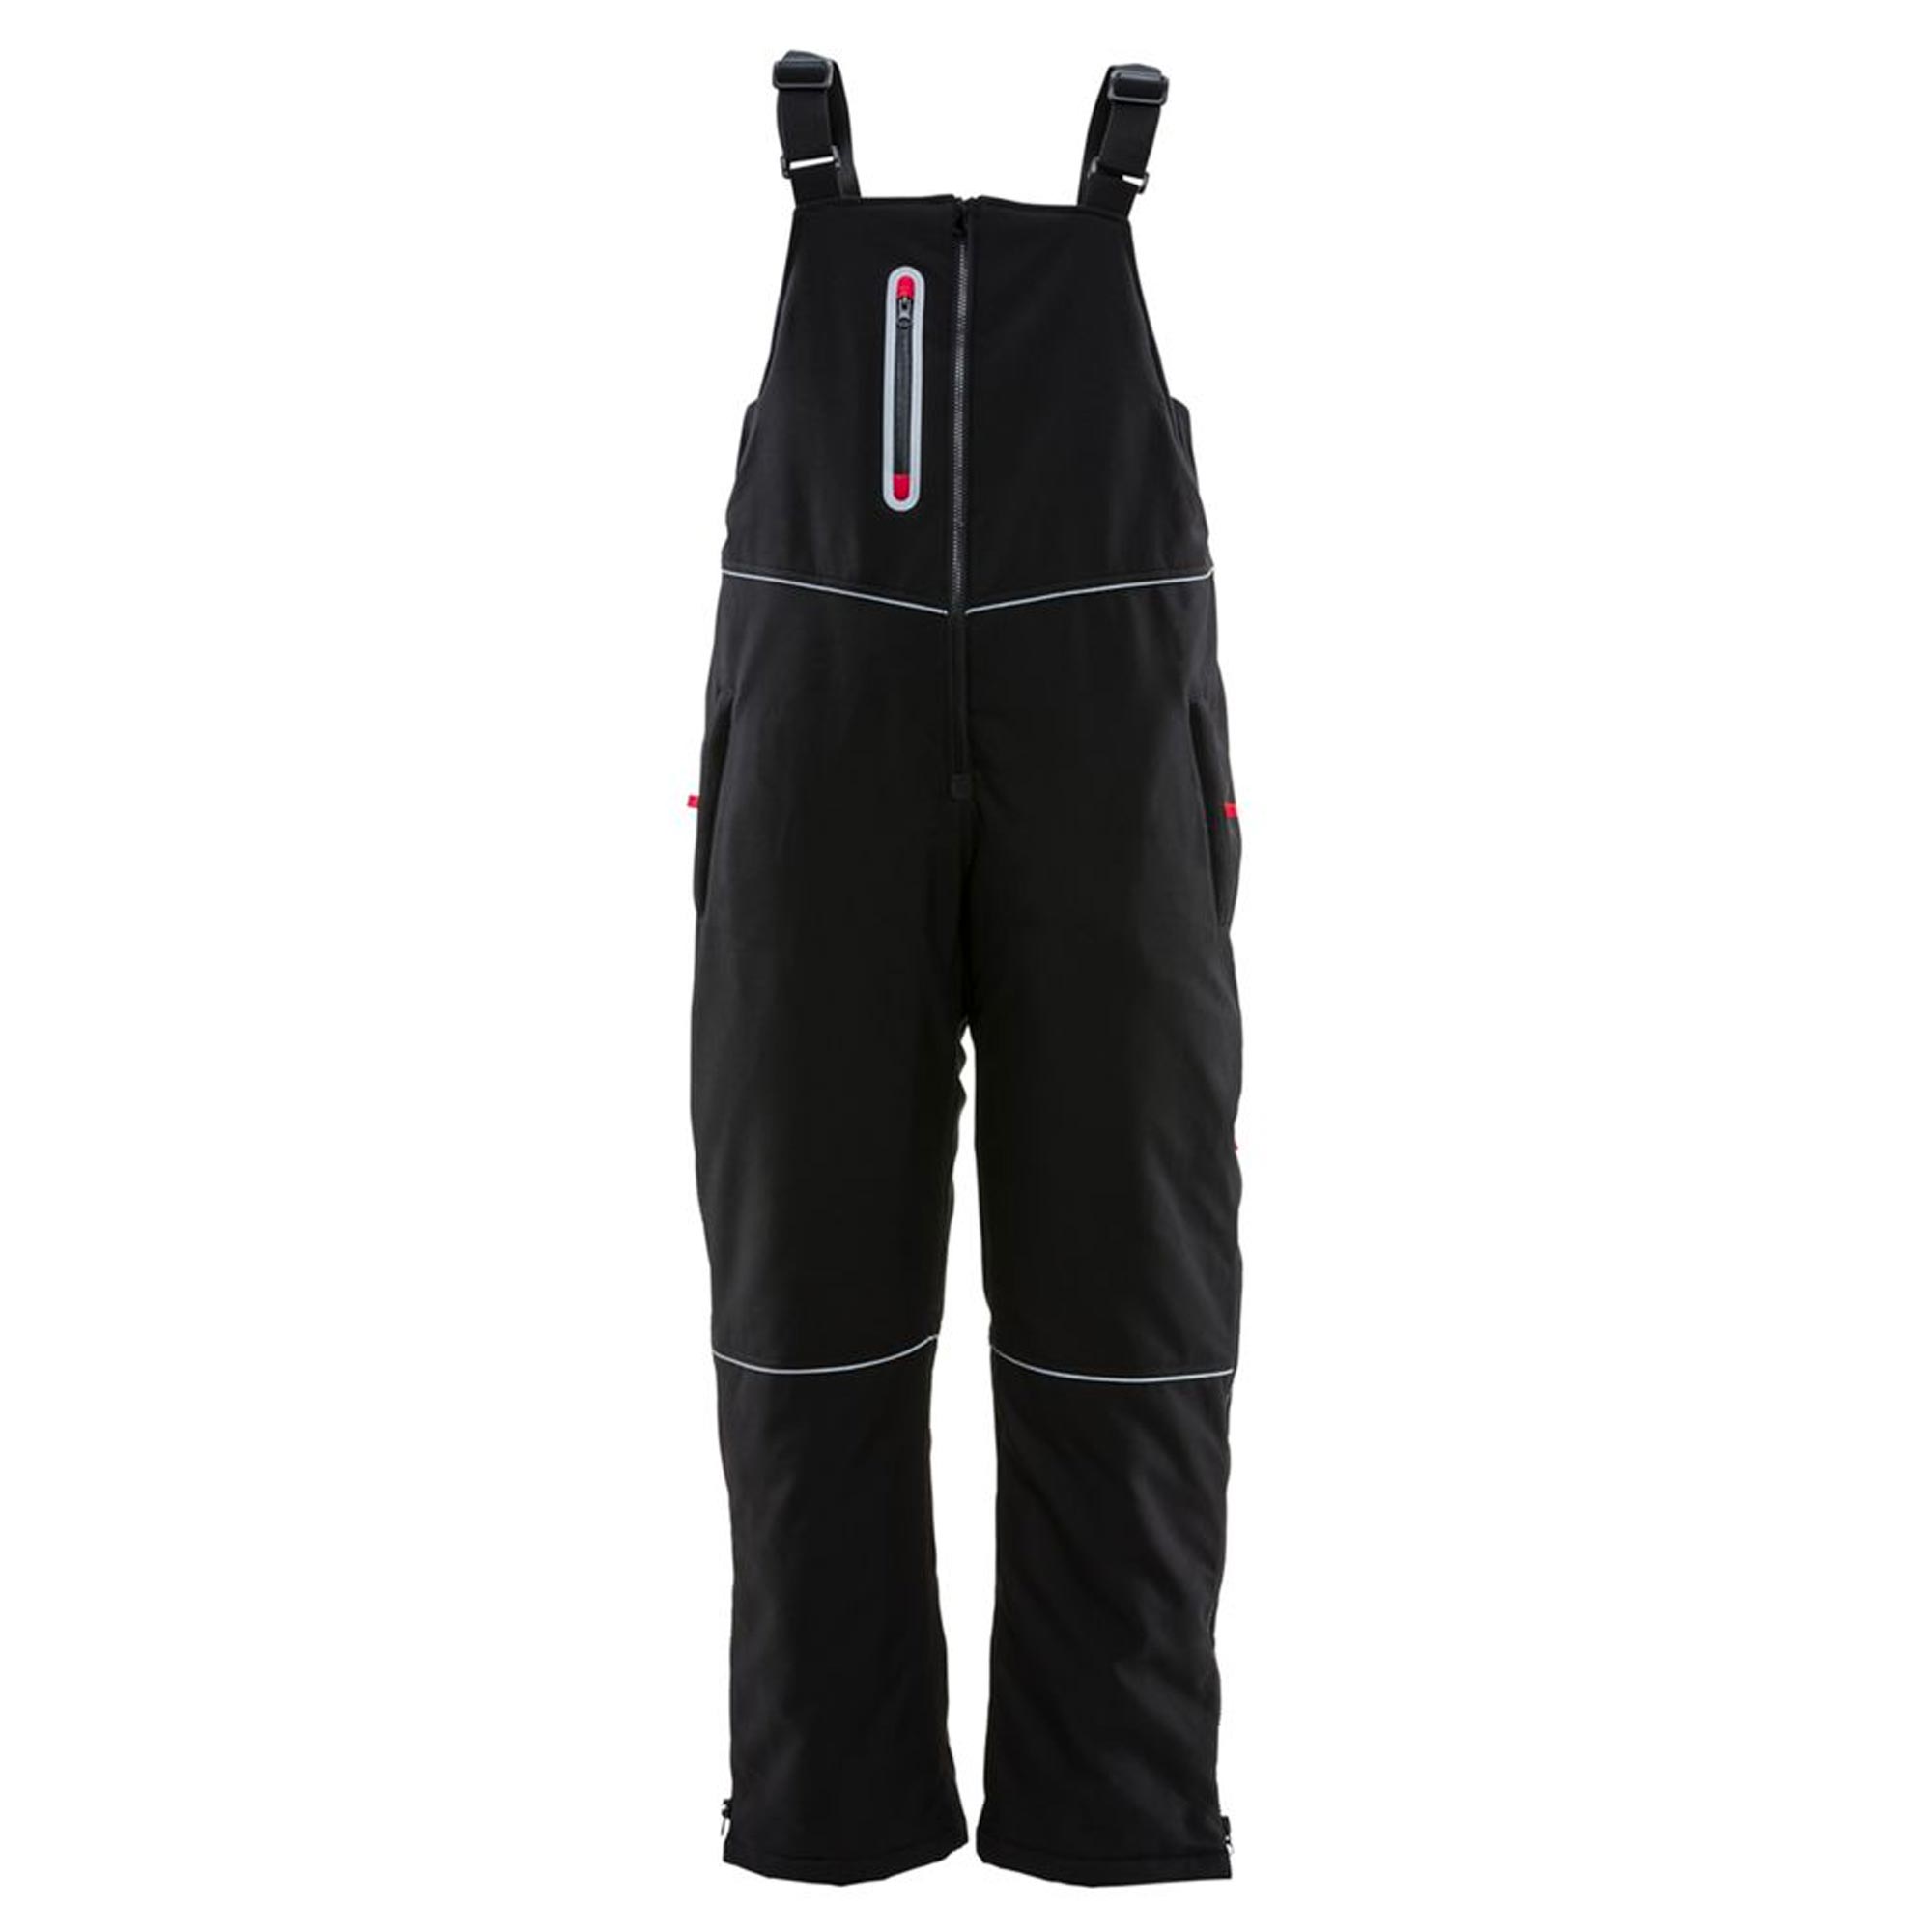 Insulated overalls